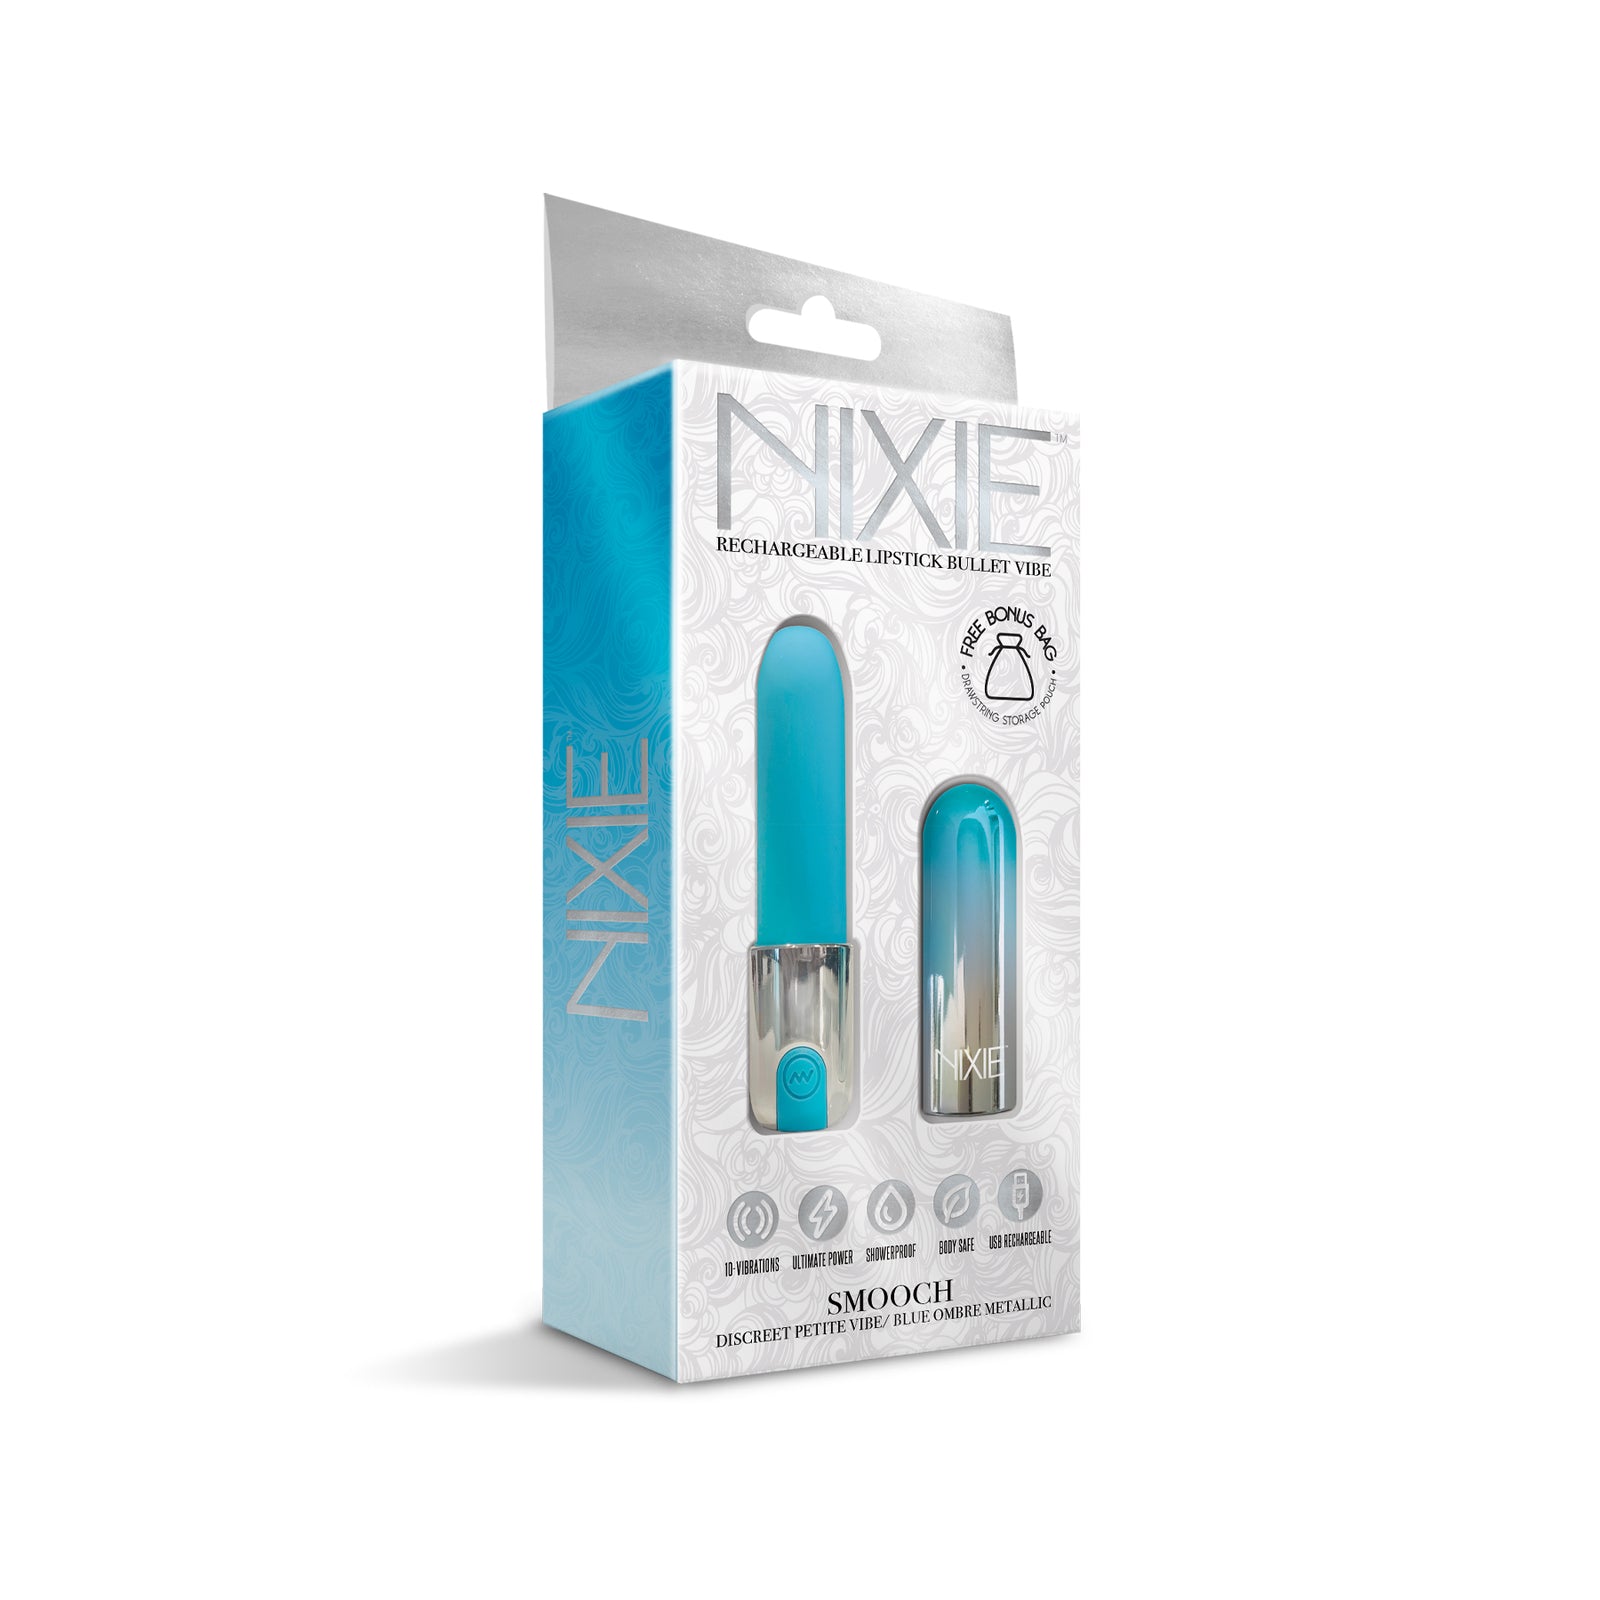 NIXIE Smooch Rechargeable Lipstick Vibrator, Blue Ombre - THES